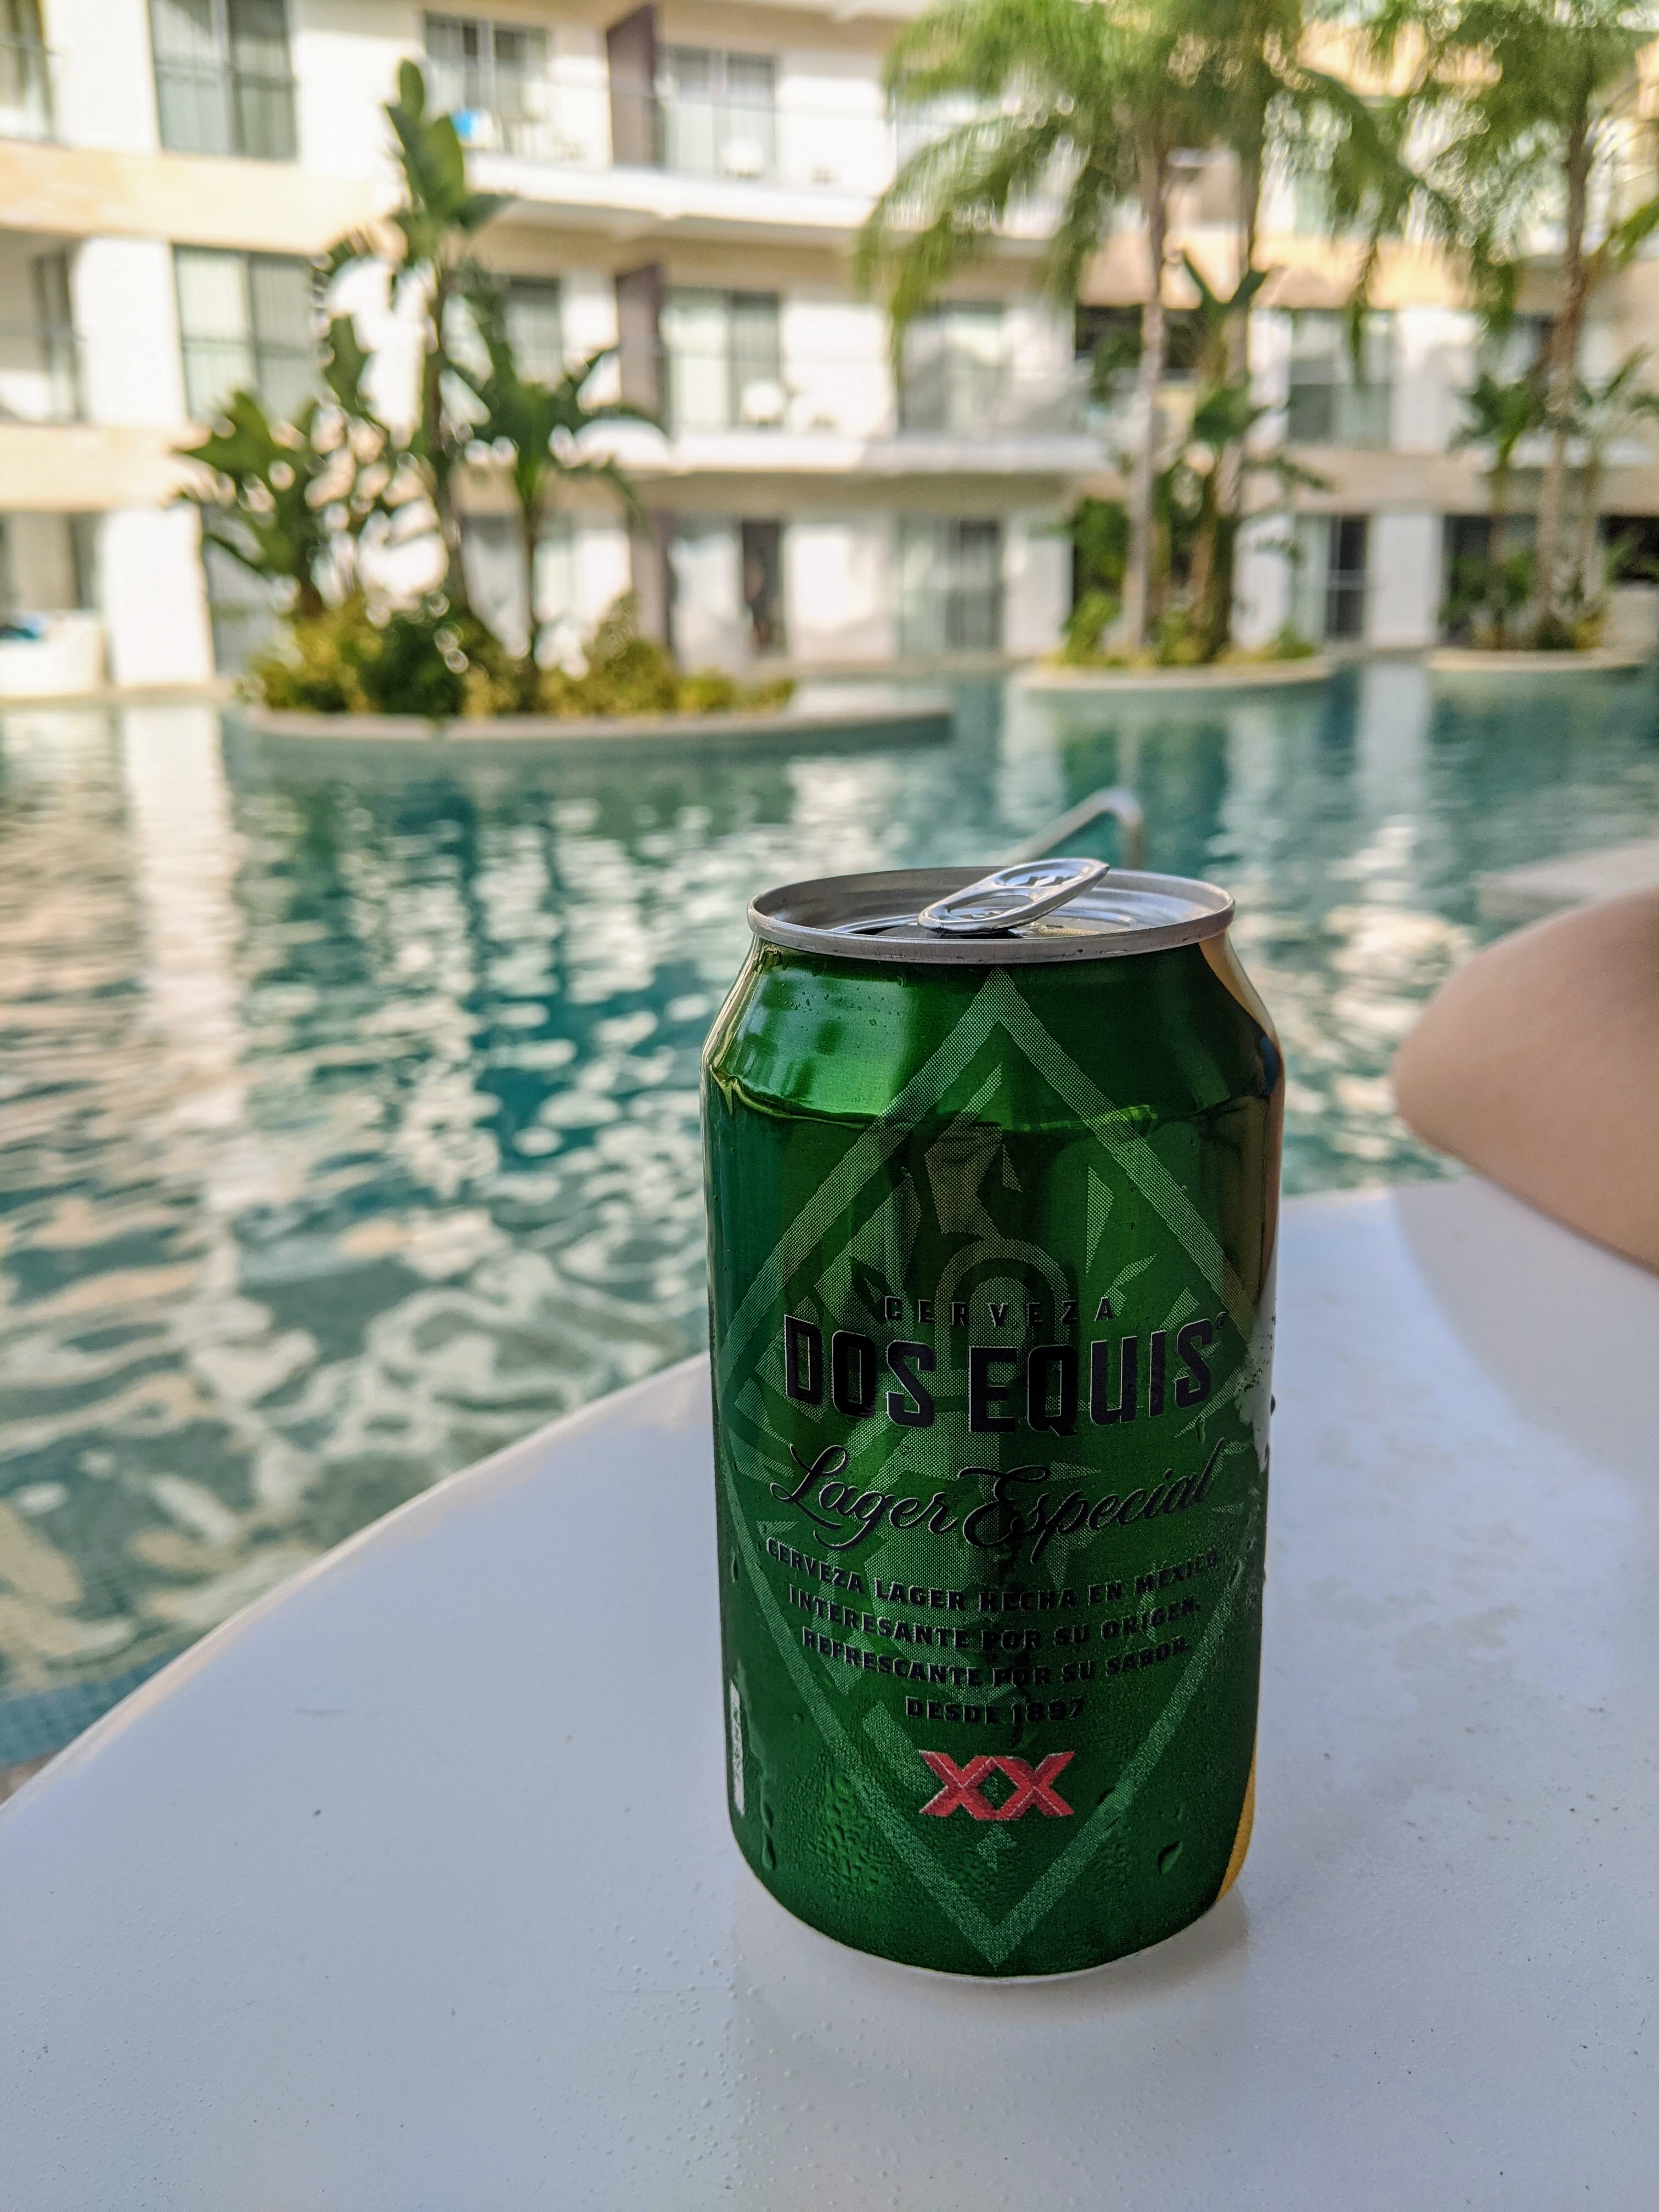 Pool and beer